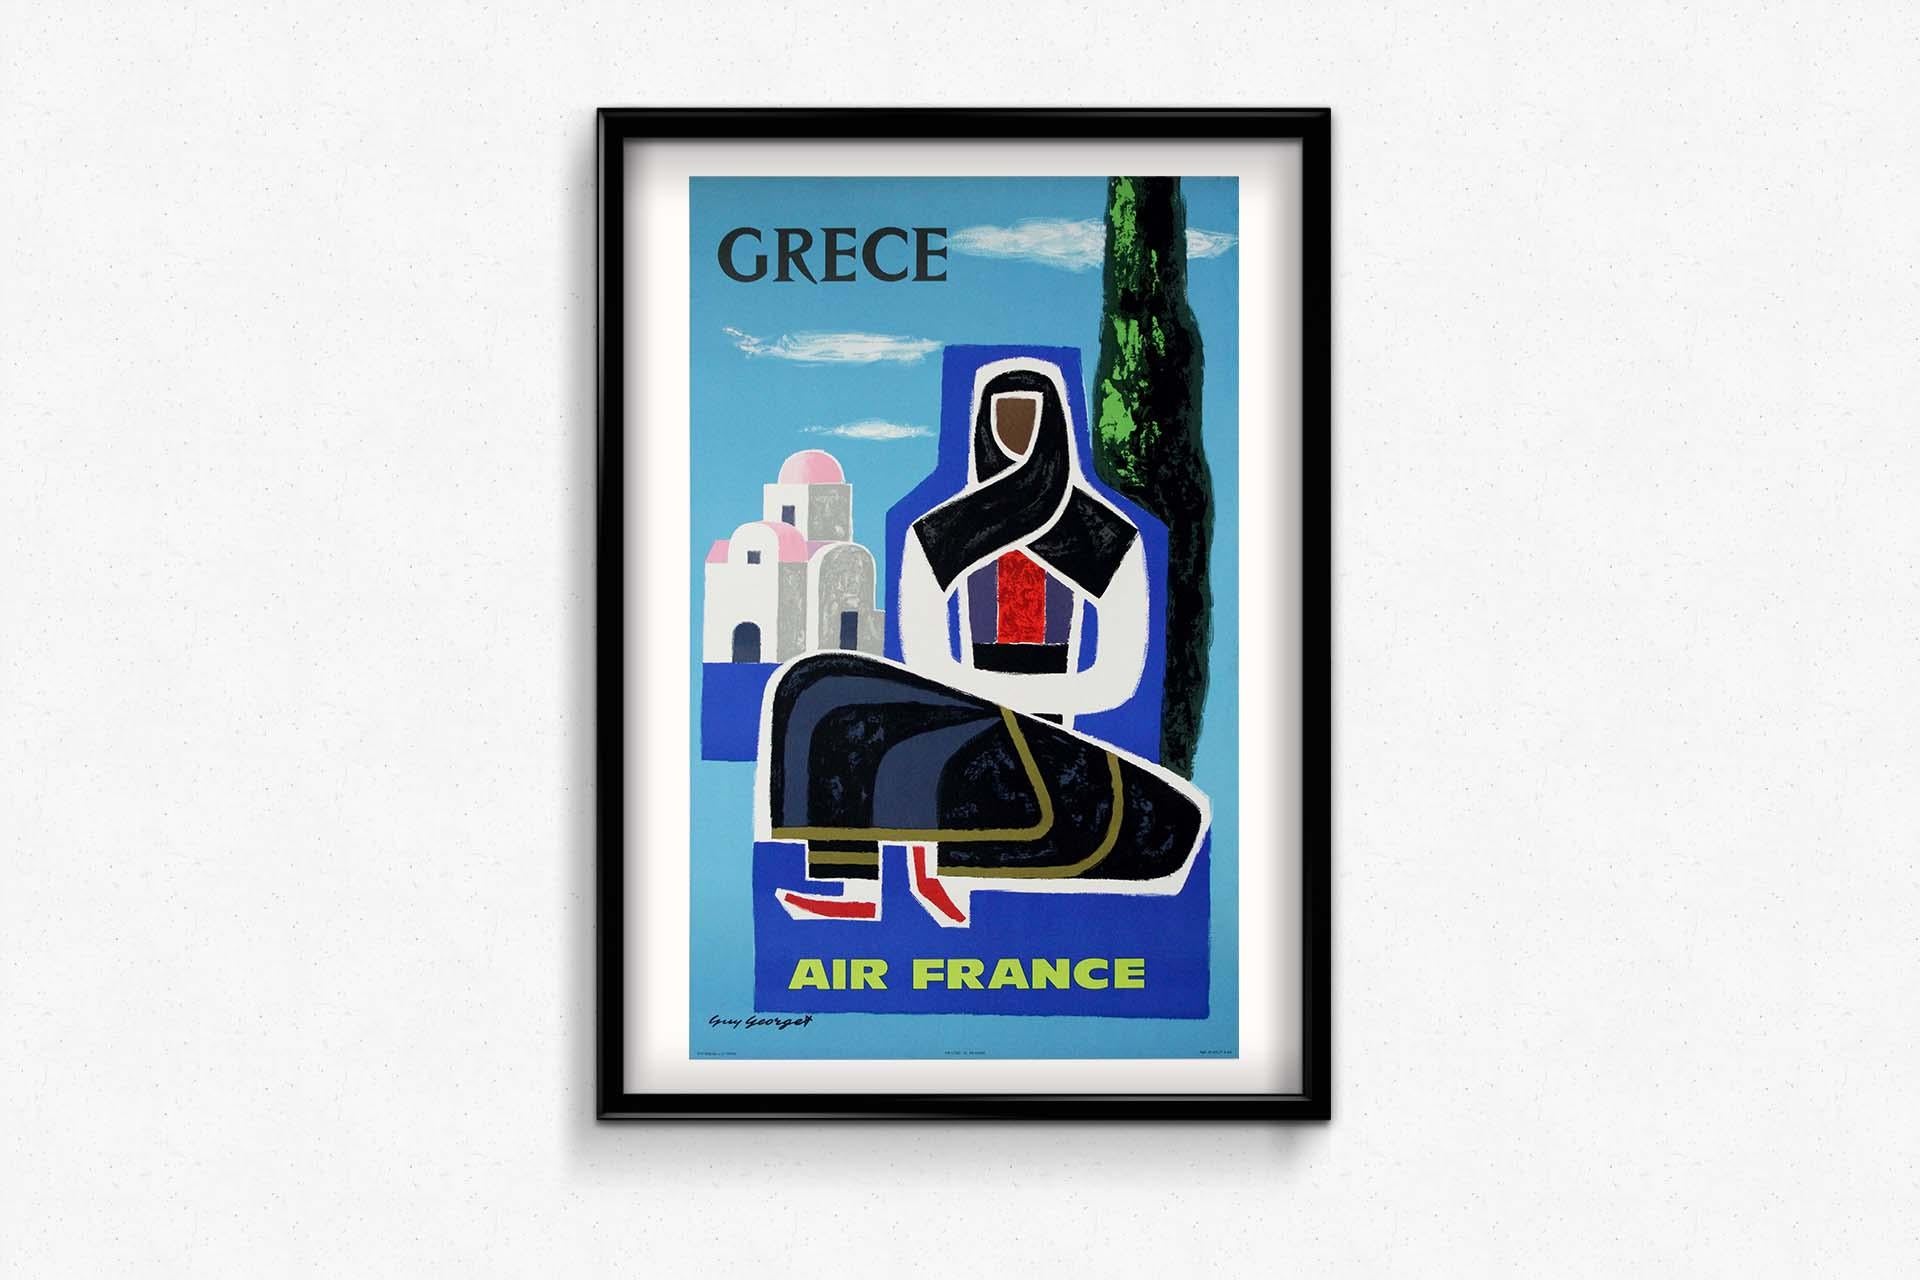 1962 original travel poster by Guy Georget for Air France travel to Greece For Sale 1